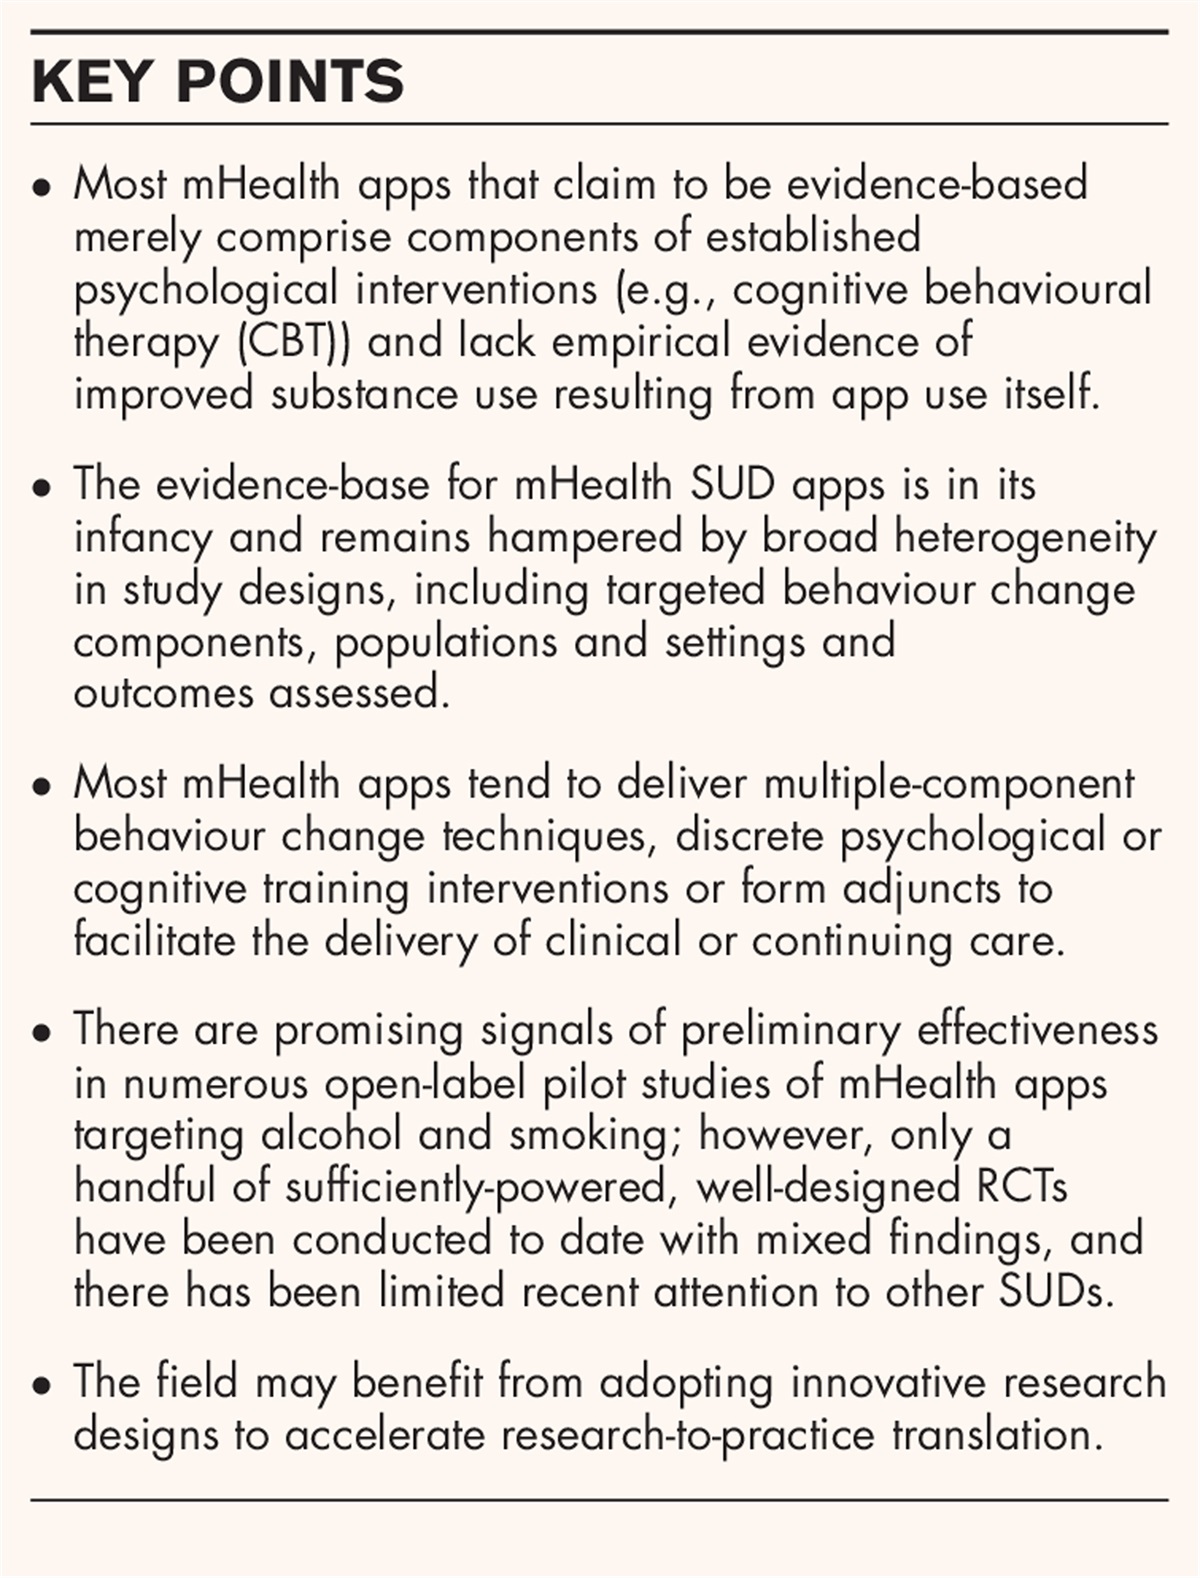 The current evidence for substance use disorder apps